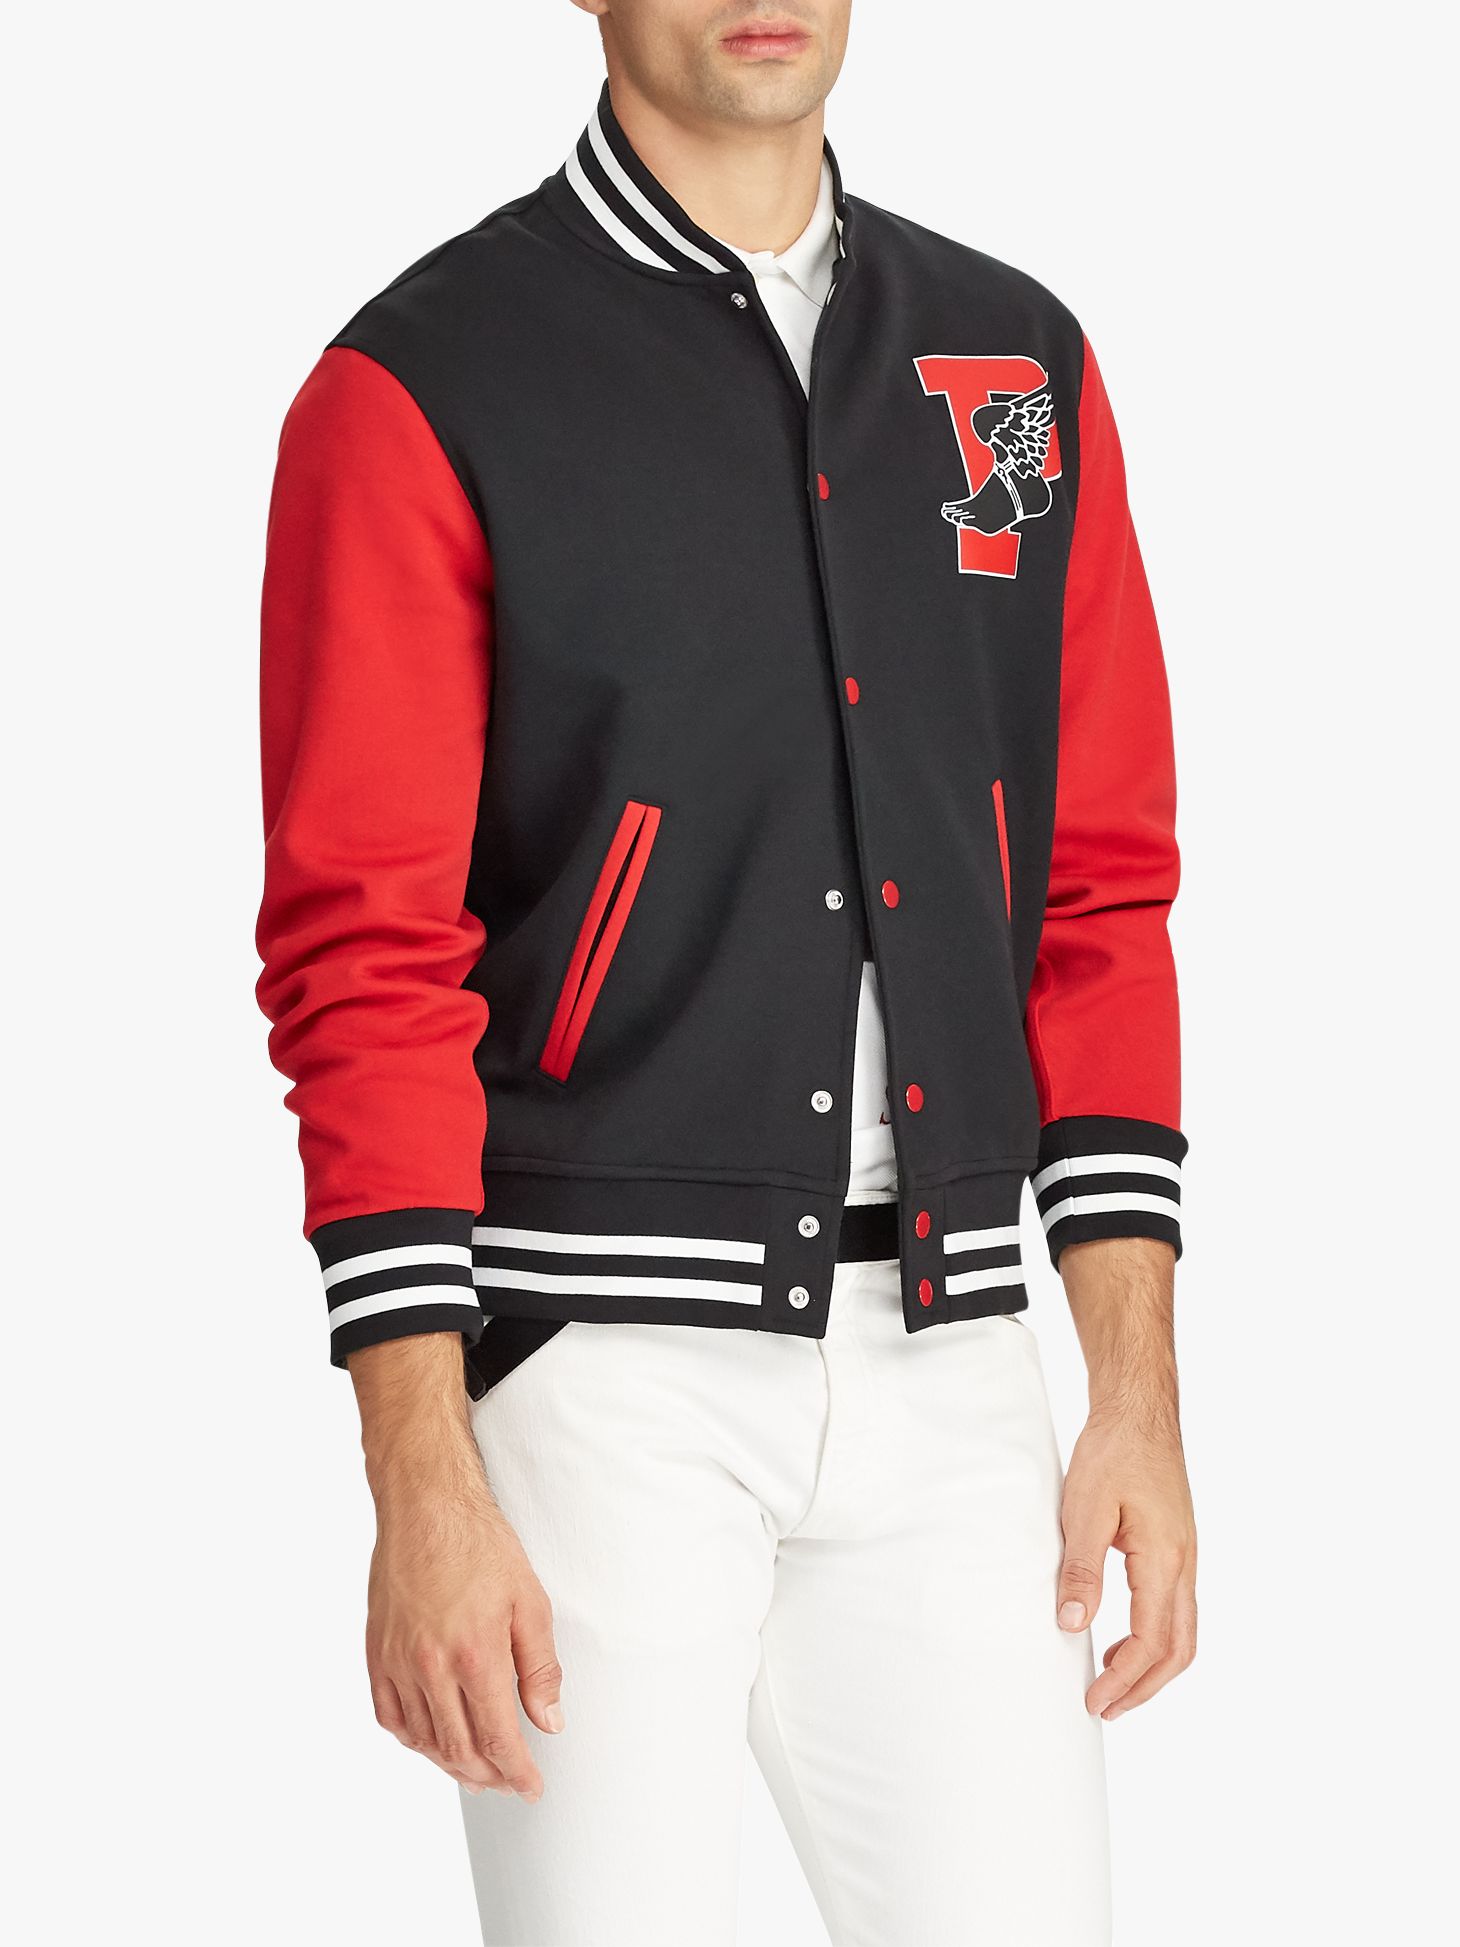 polo ralph lauren red and black jacket